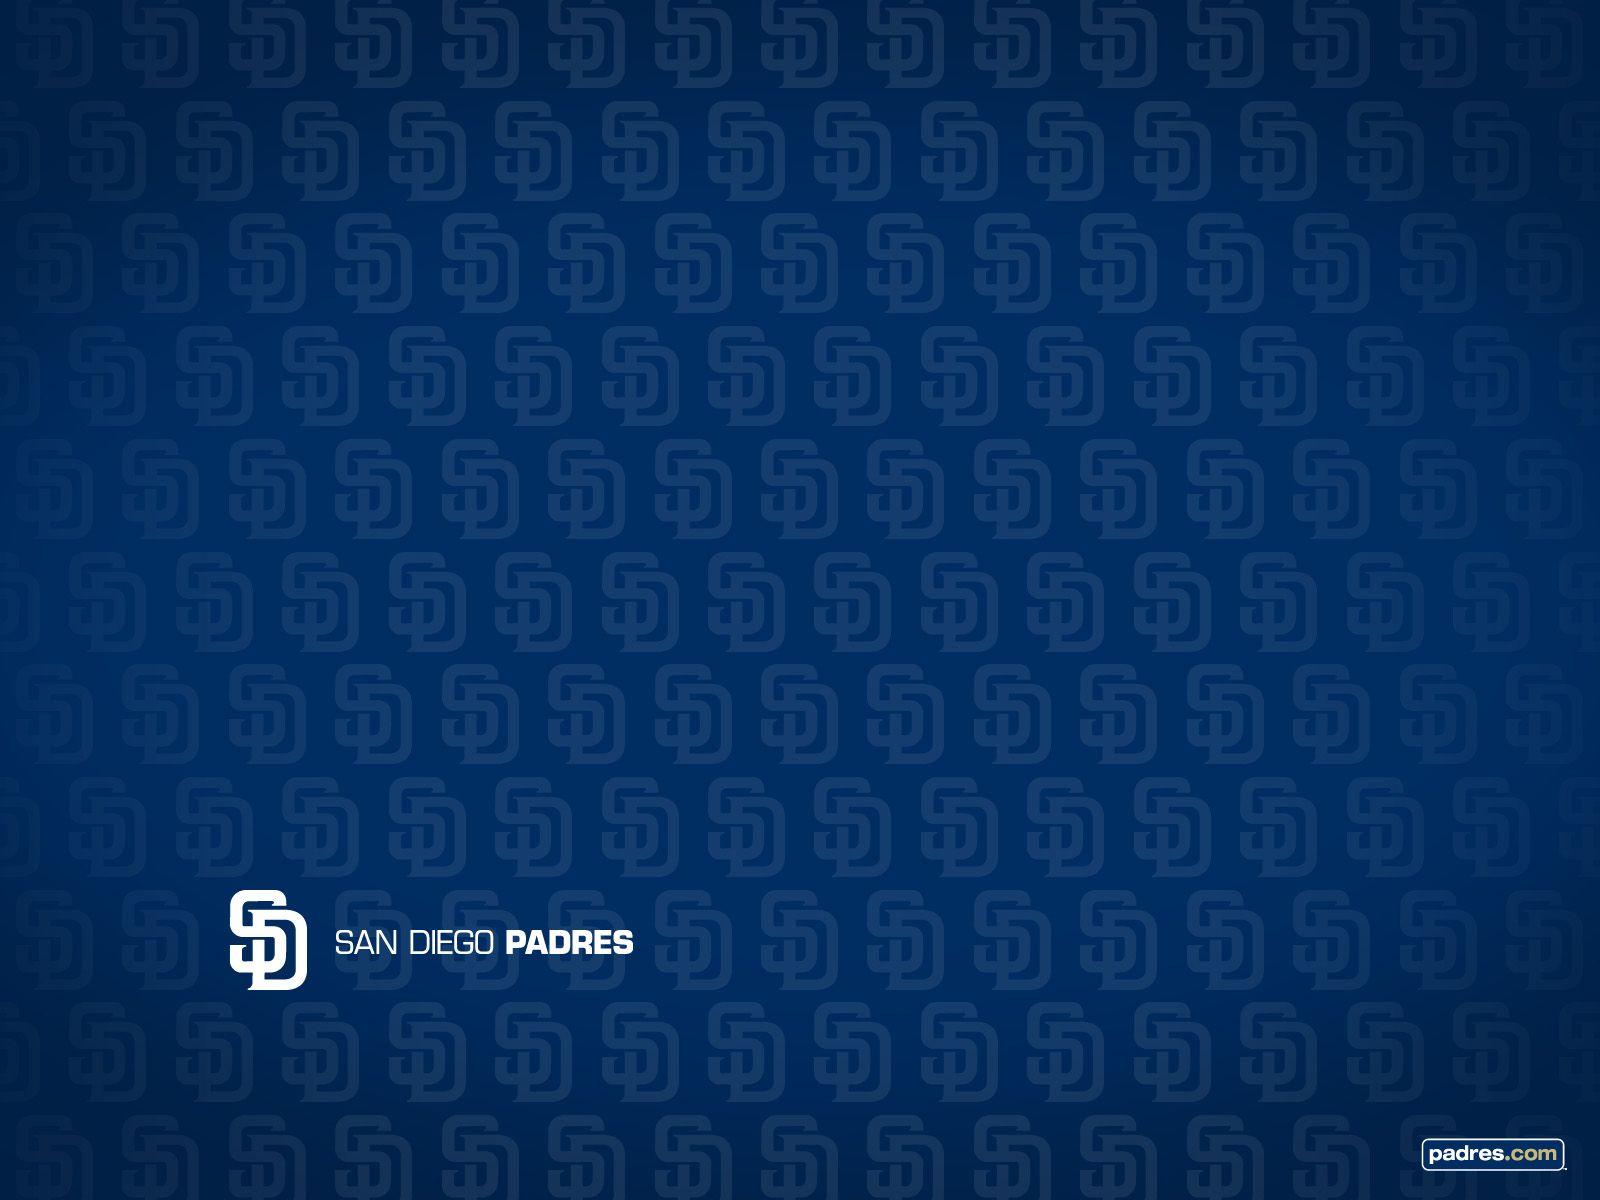 Download wallpapers San Diego Padres emblem creative 3D logo yellow  background American baseball club MLB San Diego USA San Diego Padres  baseball San Diego Padres insignia for desktop with resolution 2560x1600  High